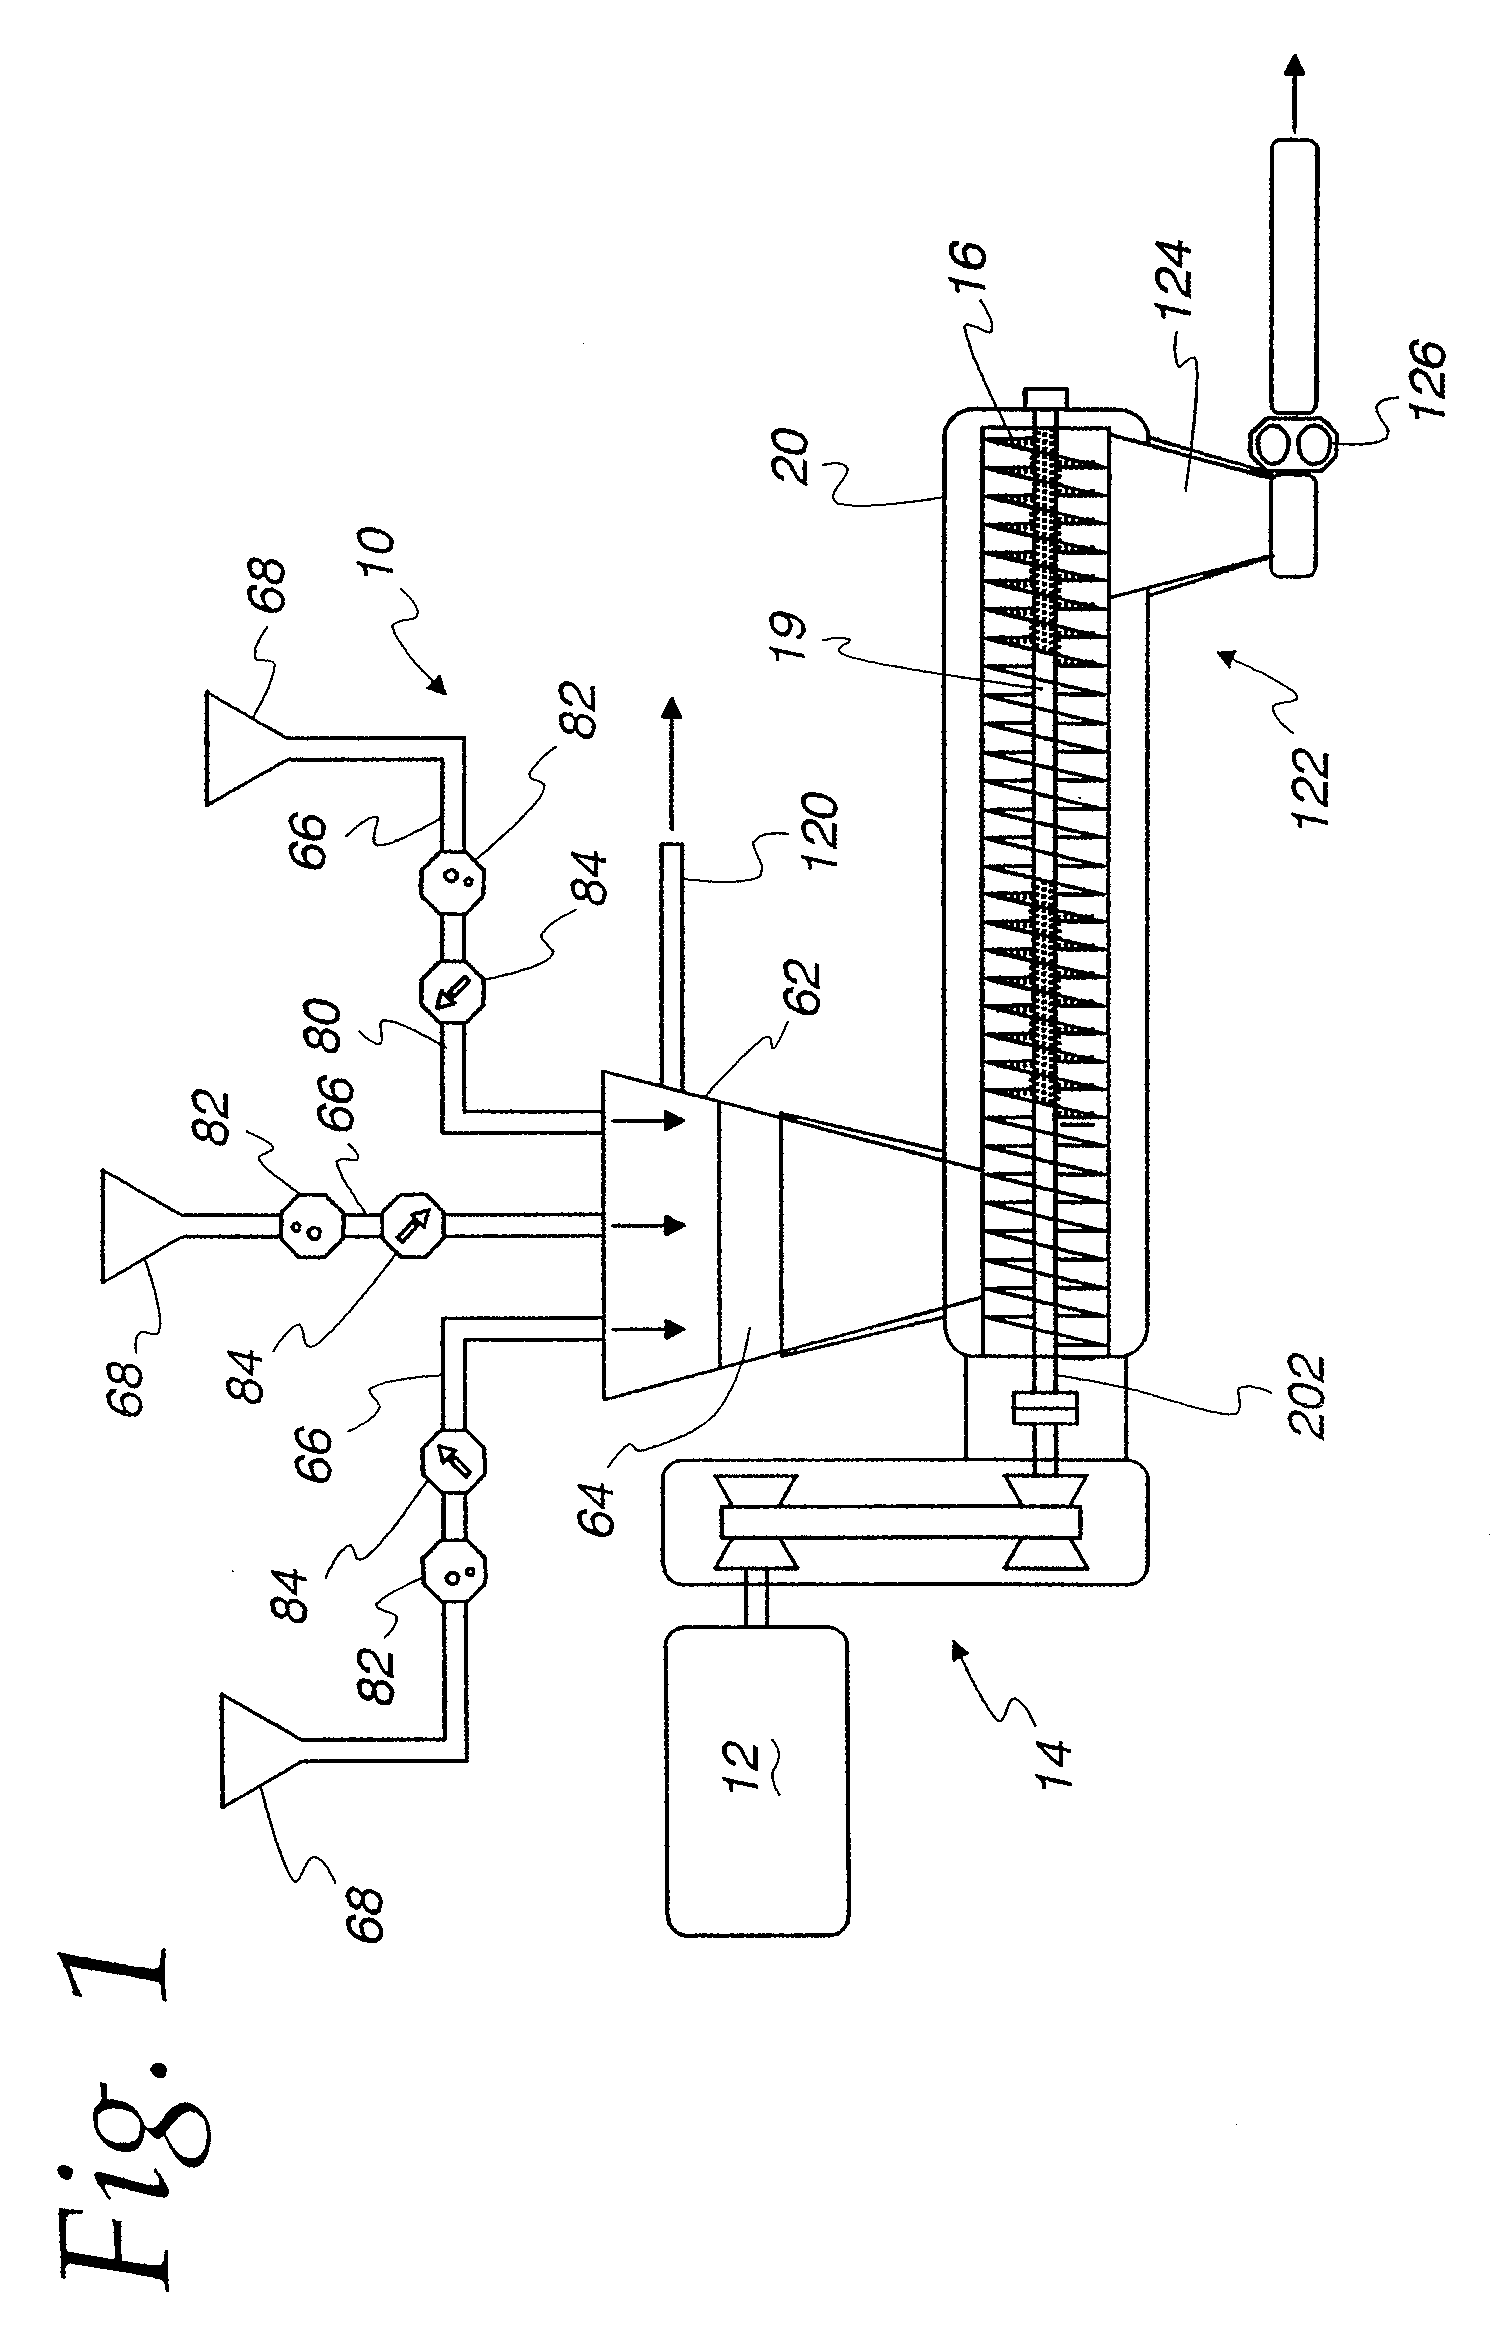 Method of making processed meat products